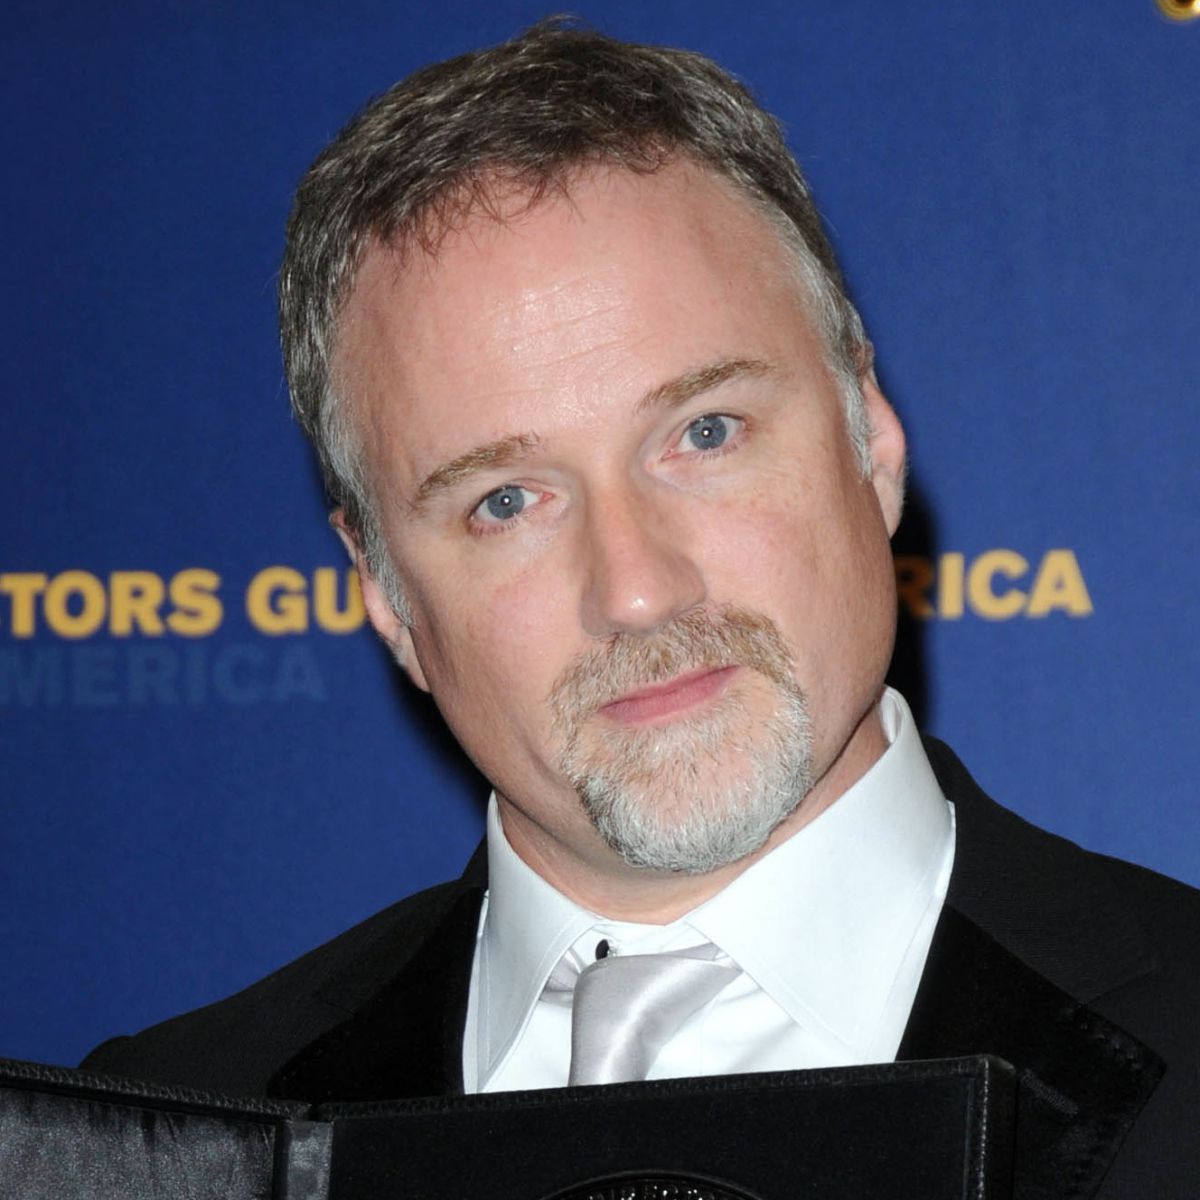 One of the directors who make actors' lives difficult while film production David Fincher